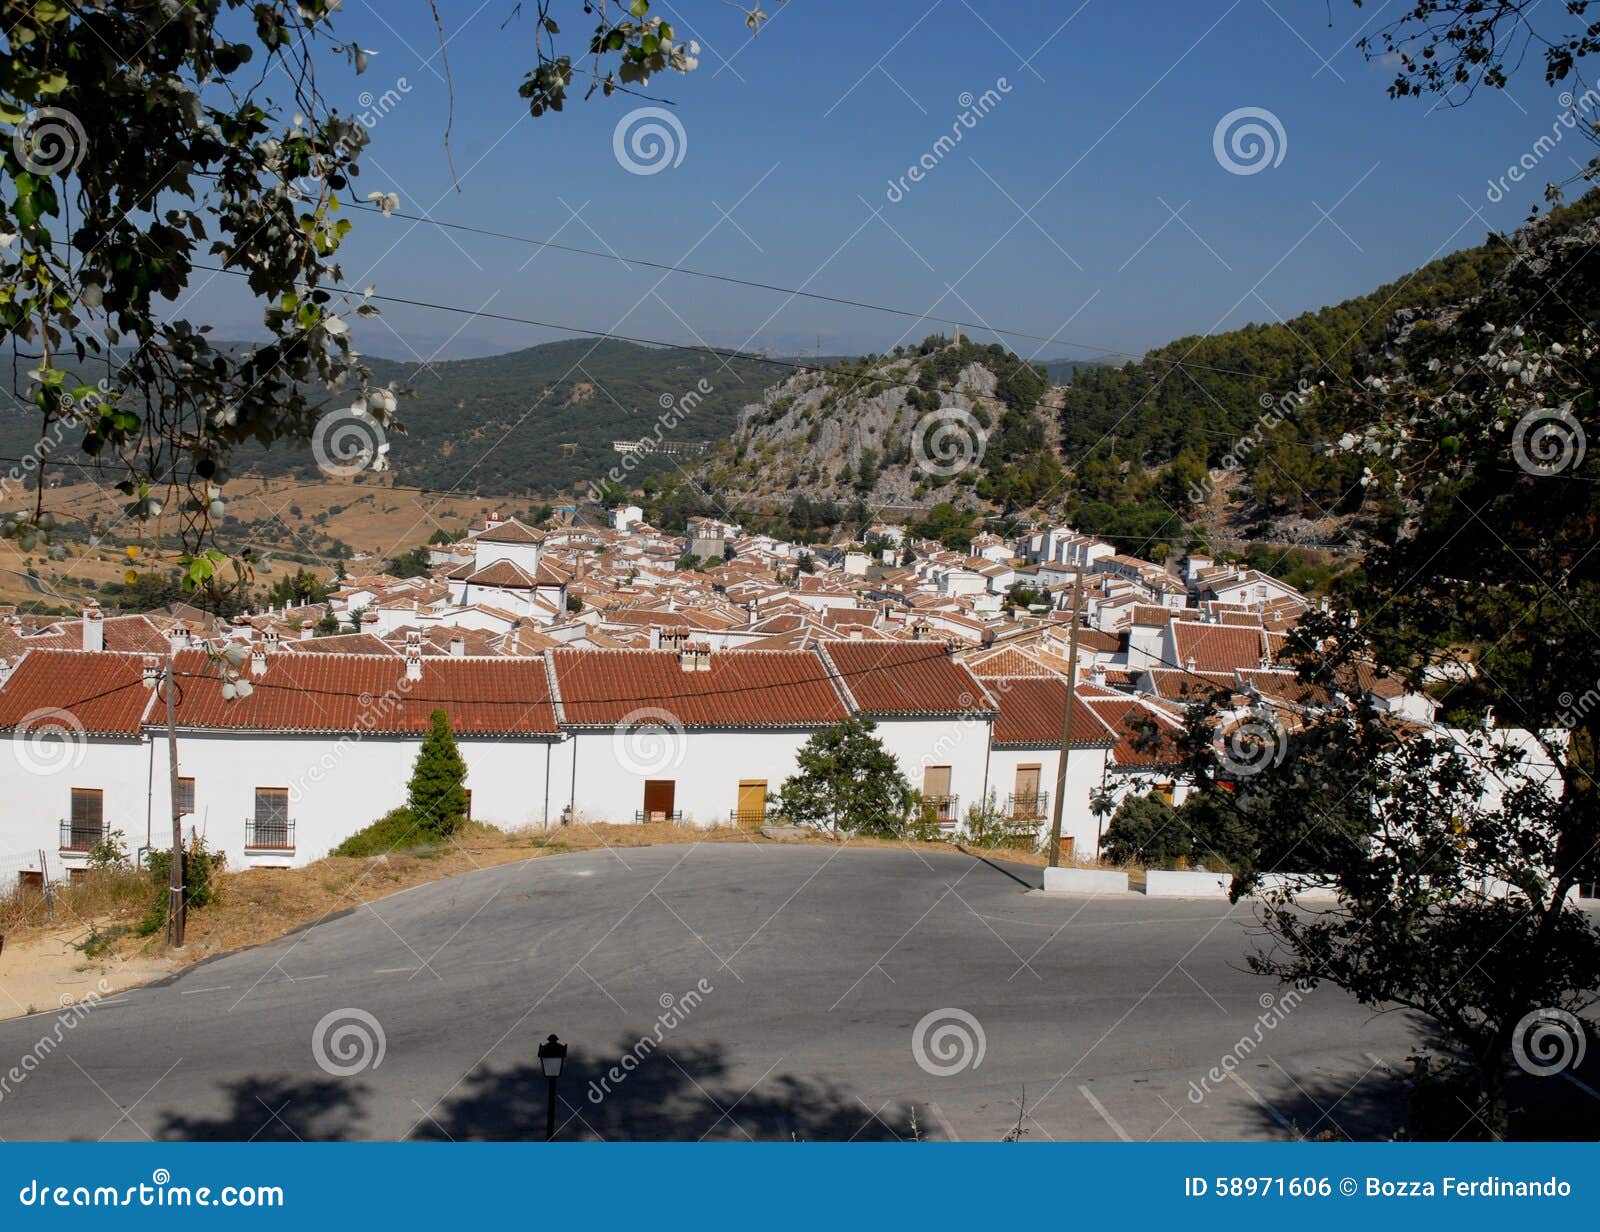 some houses in el bosque in andalusia (spain)